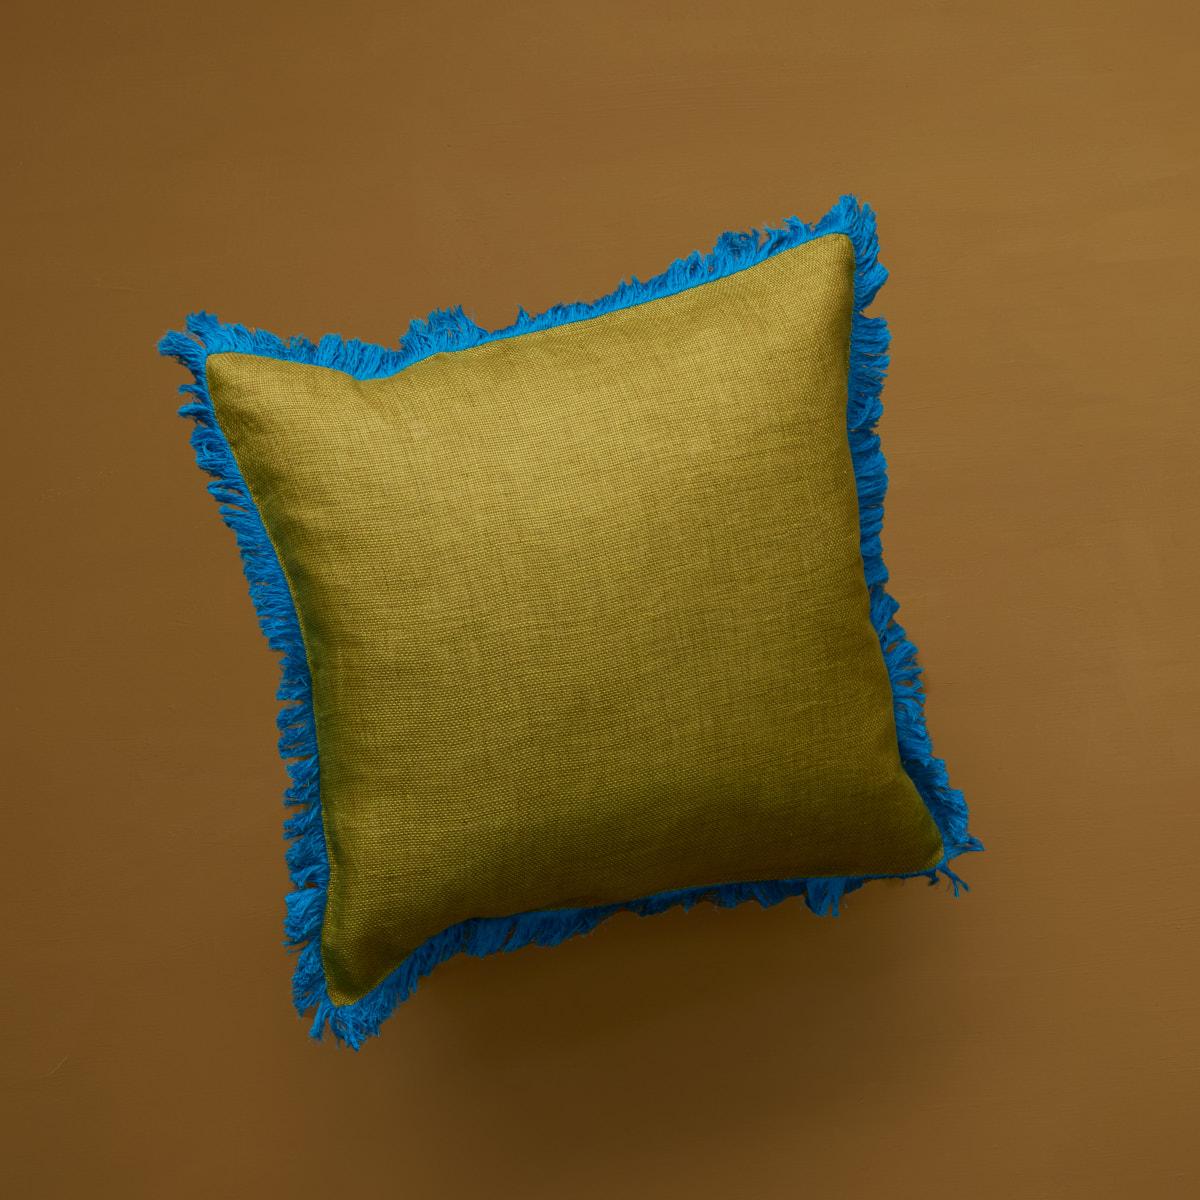 Add a splash of colour to your room with this cushion in a brigth shade of green and blue. The Kadhi cotton fabric is finished with a striking blue grass fringe ending entirely made by hand. Comes without filler, duck feather fillers can be ordered